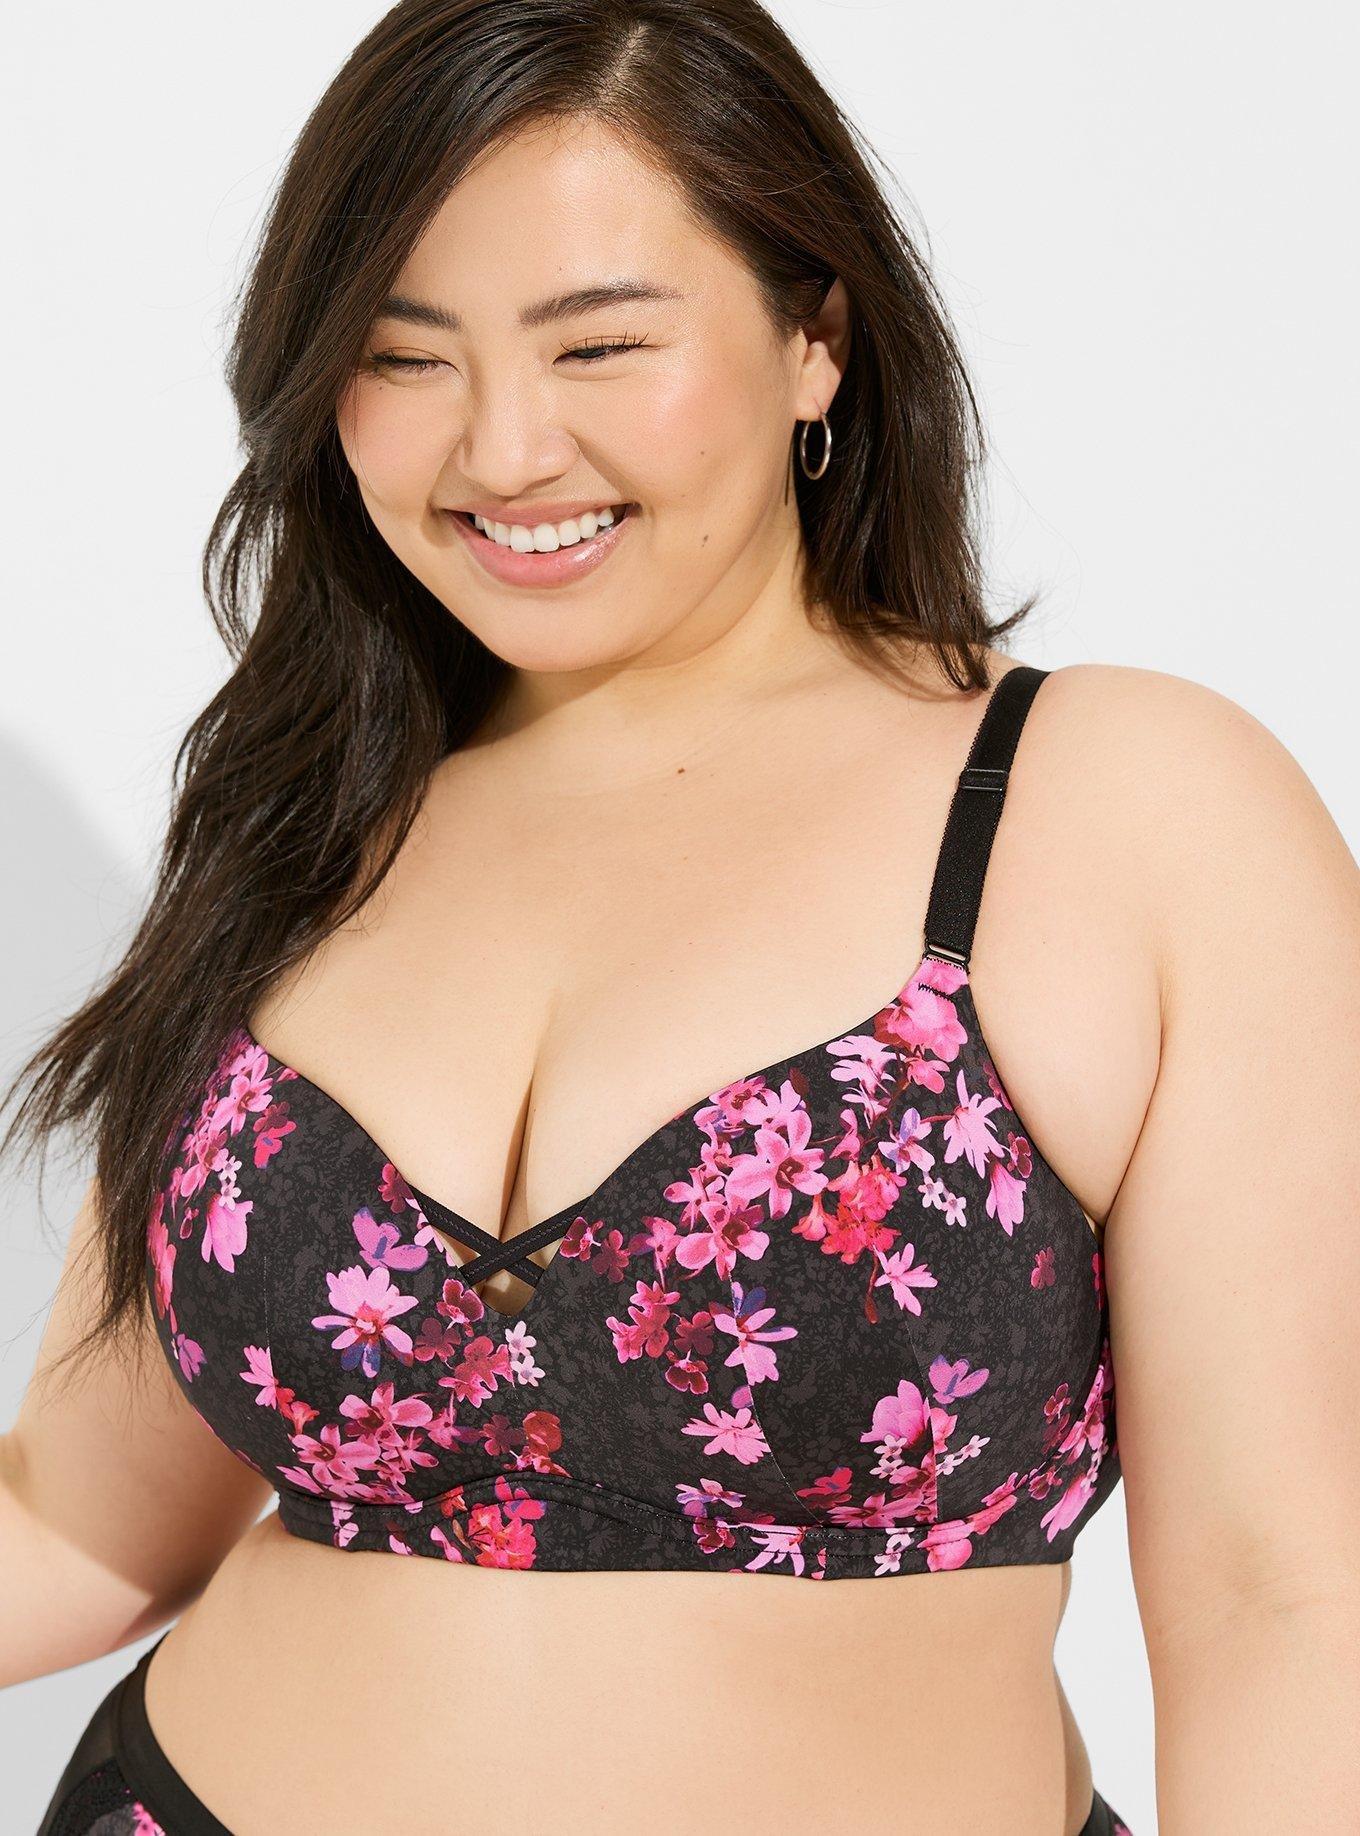 TORRID BRA HAUL : I BOUGHT THE WRONG SIZE !!! SEE WHAT HAPPENED + TRY ON 